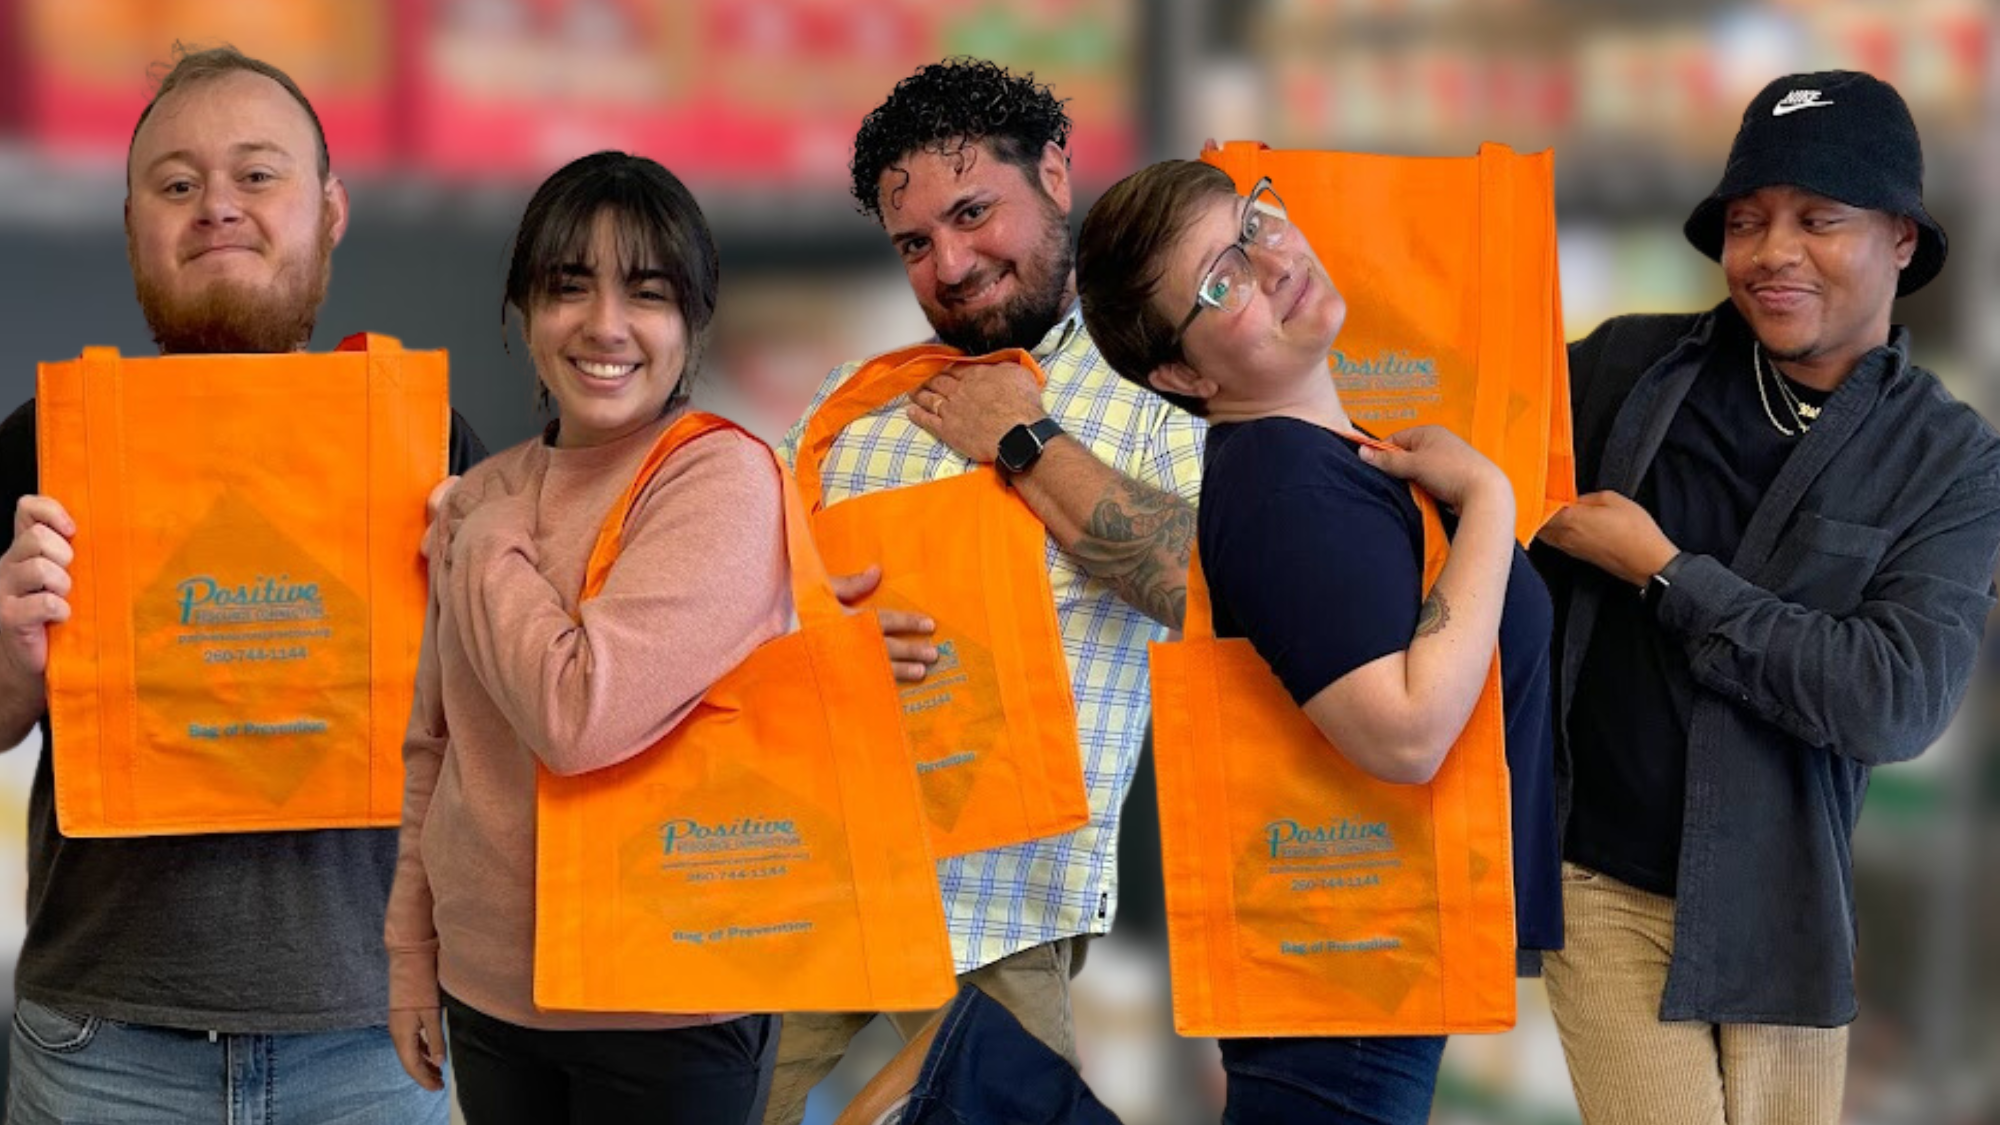 Some PRC staff members smiling and holding orange tote bags with the PRC logo